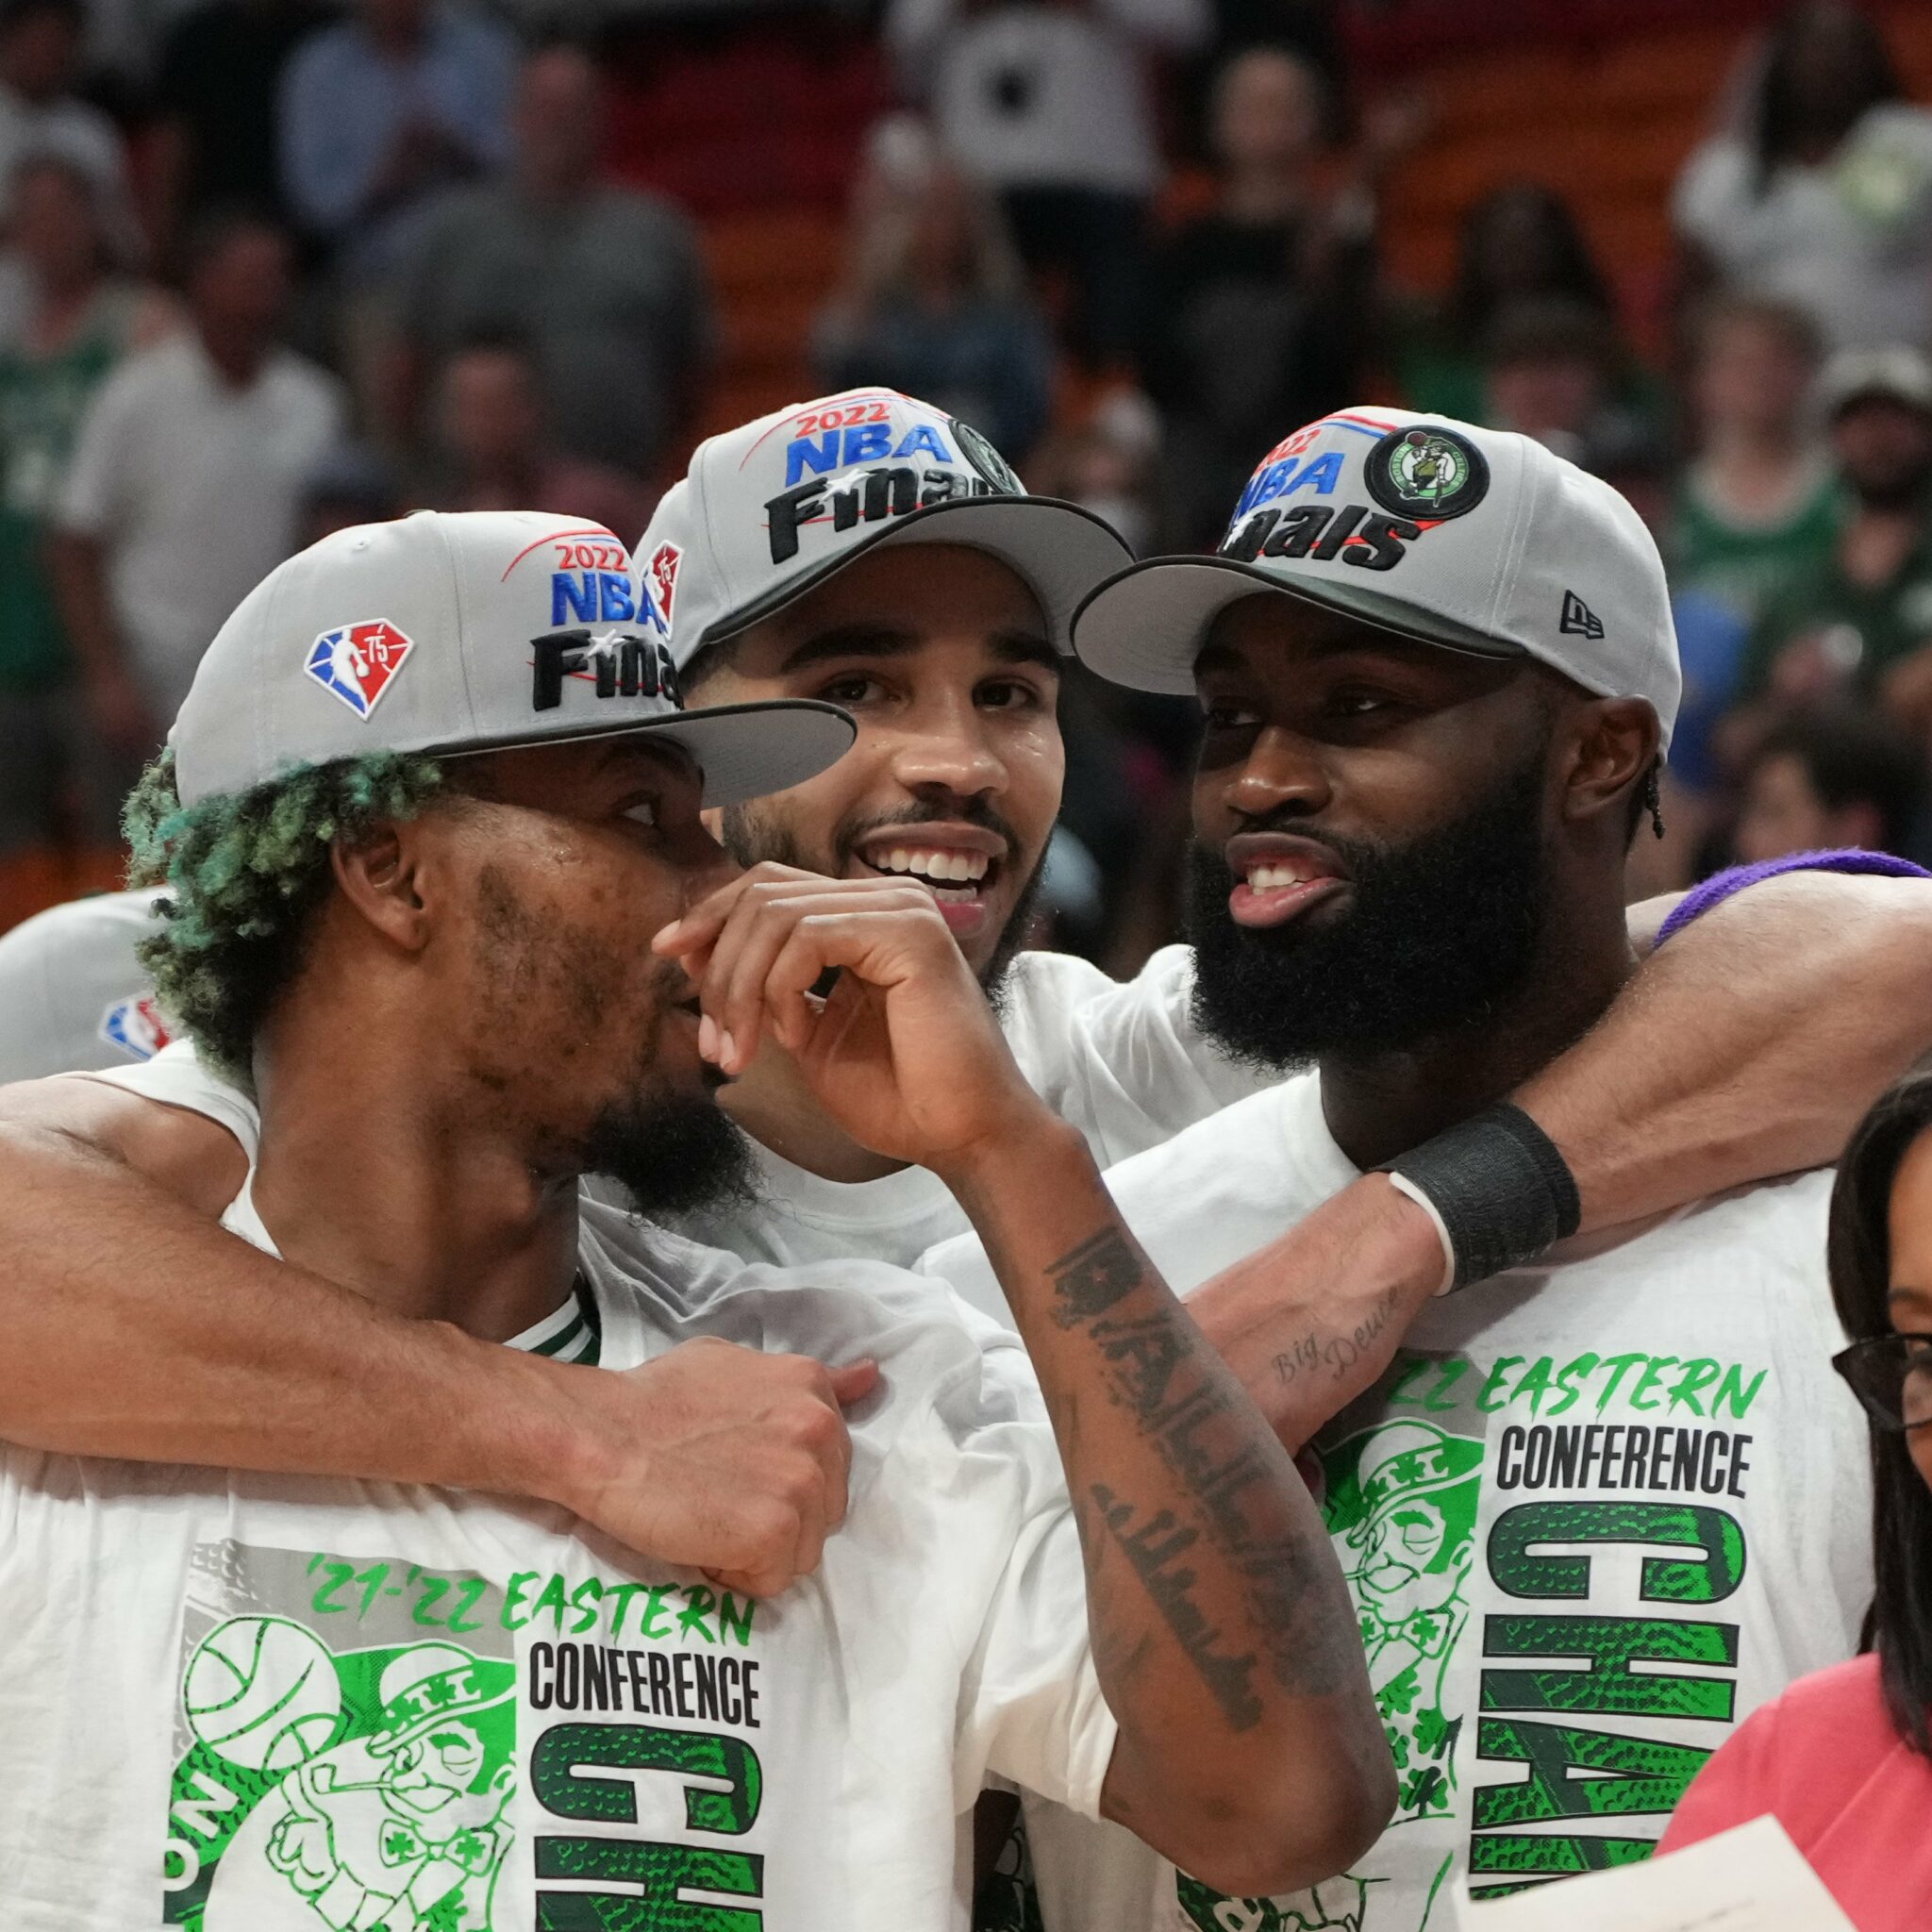 Boston Celtics win the Eastern Conference Championship; Set to face the